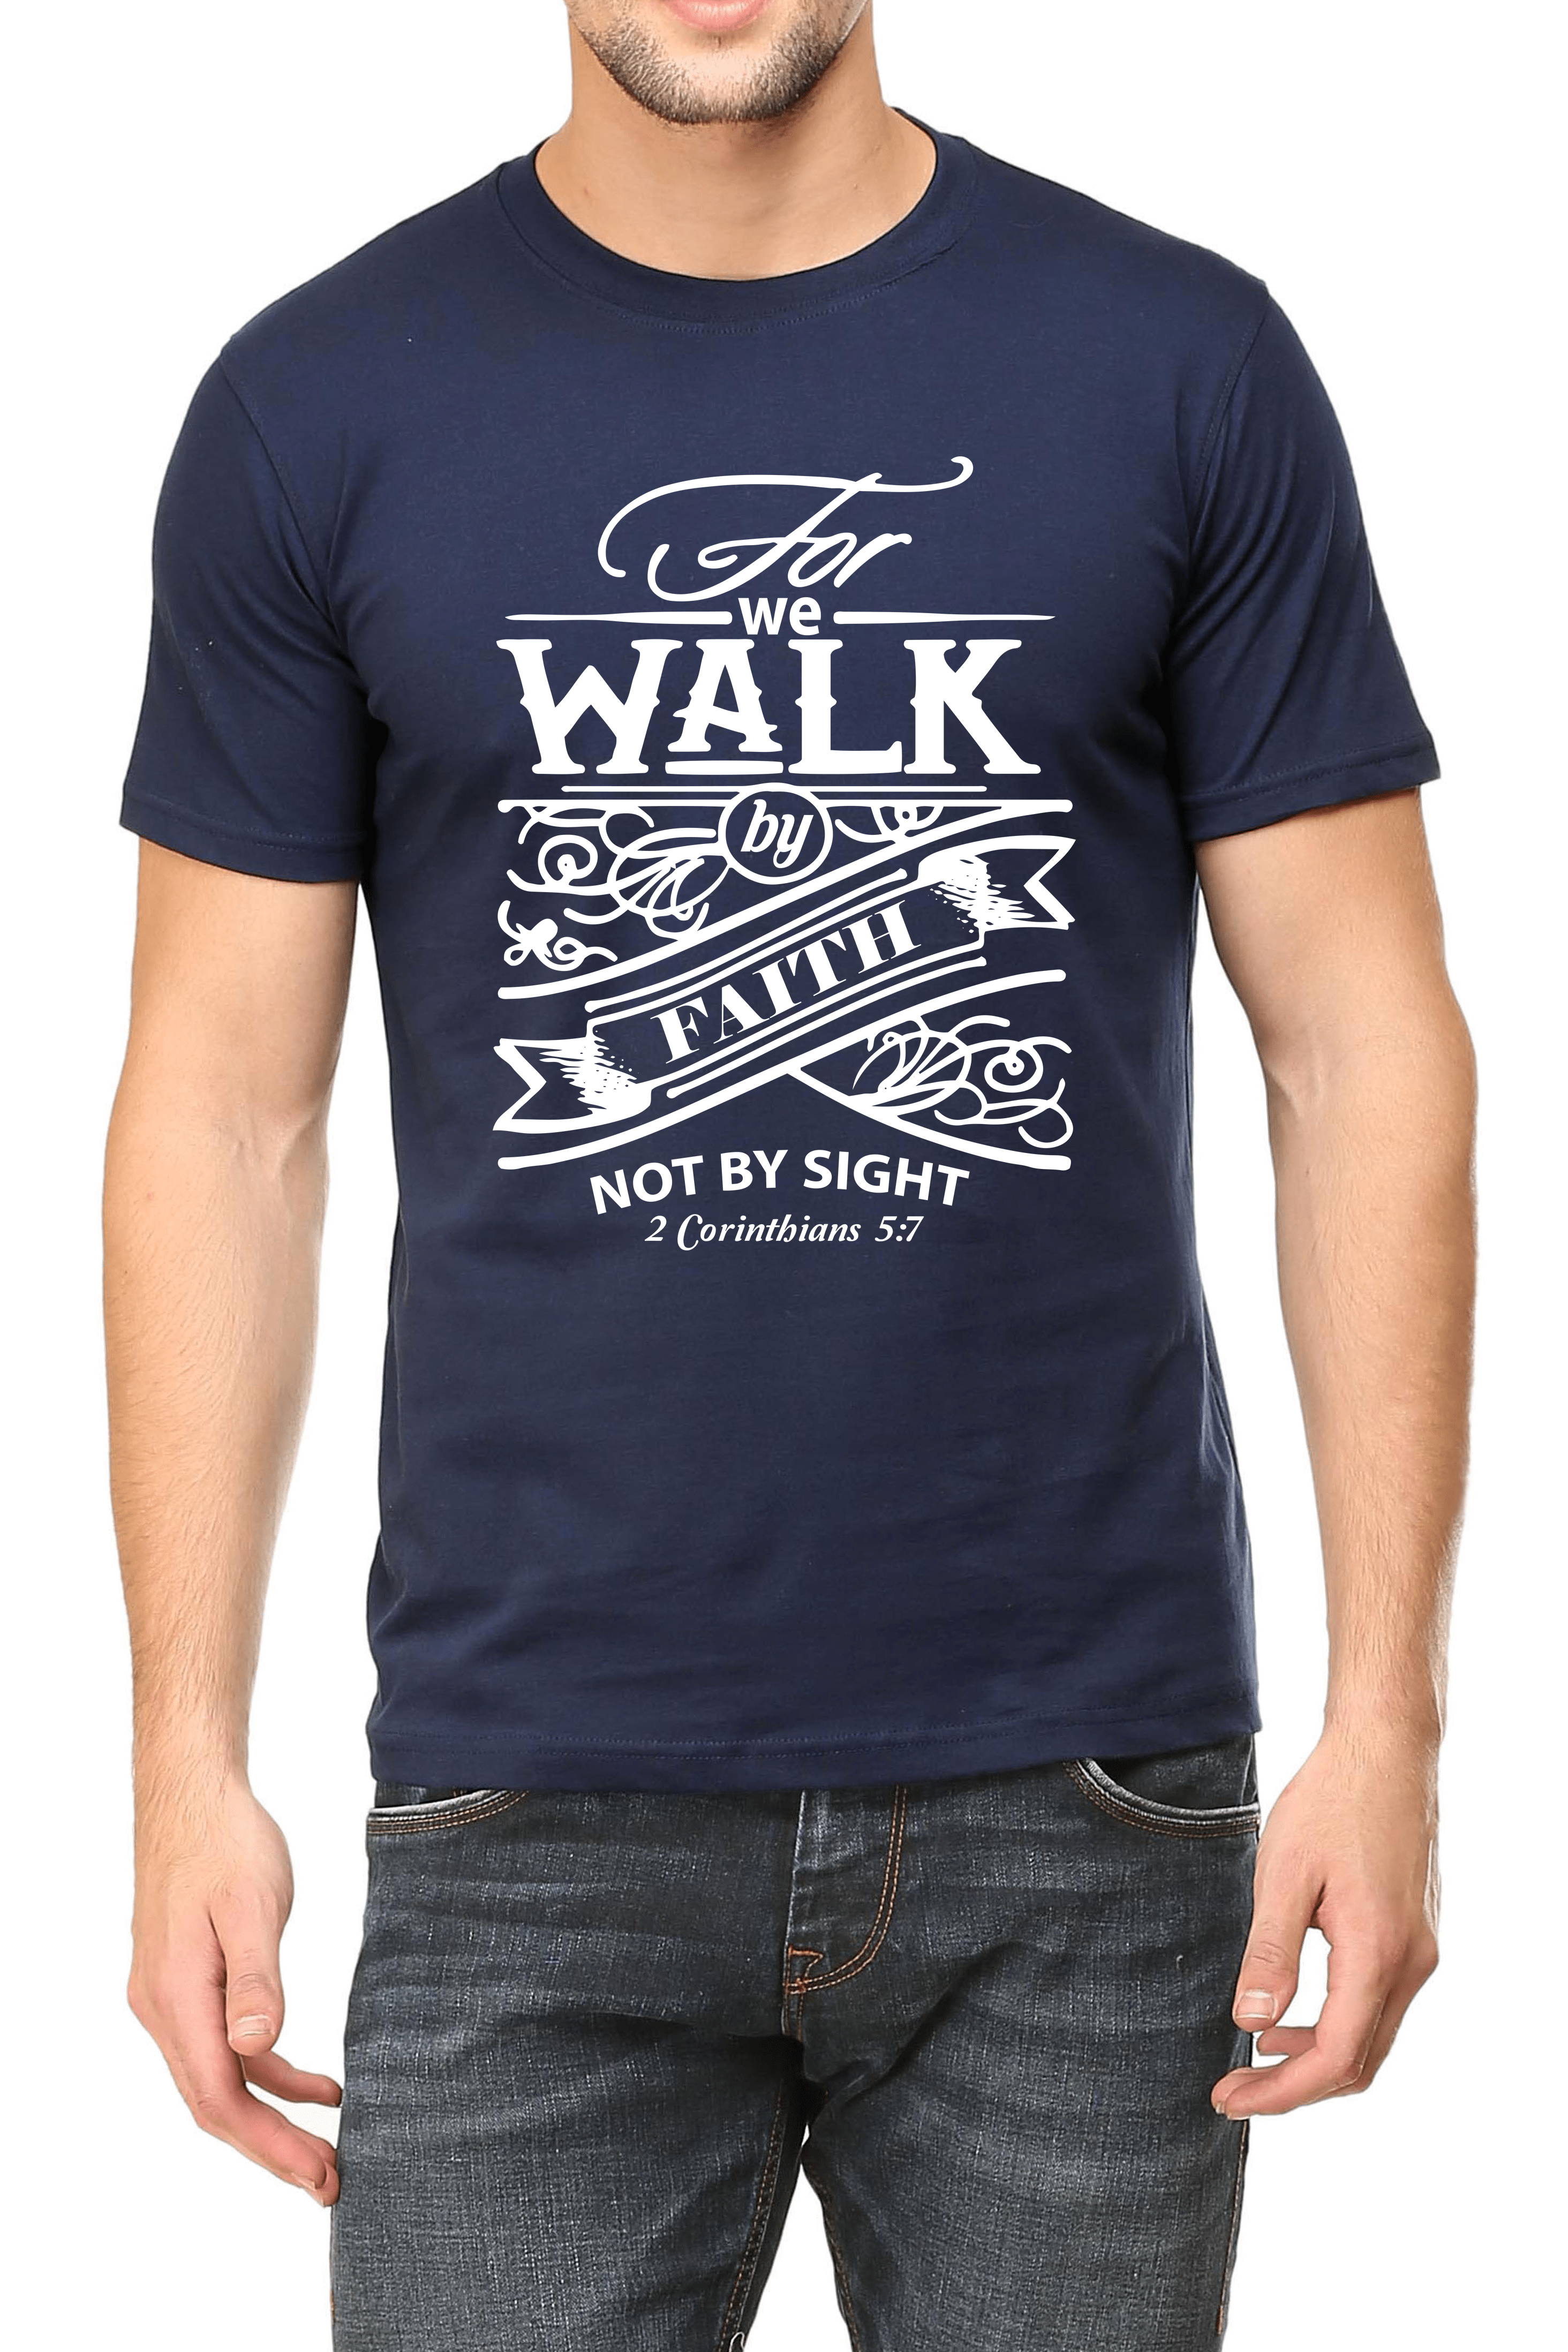 Living Words Men Round Neck T Shirt S / Navy Blue For we walk by Faith - Christian T-Shirt